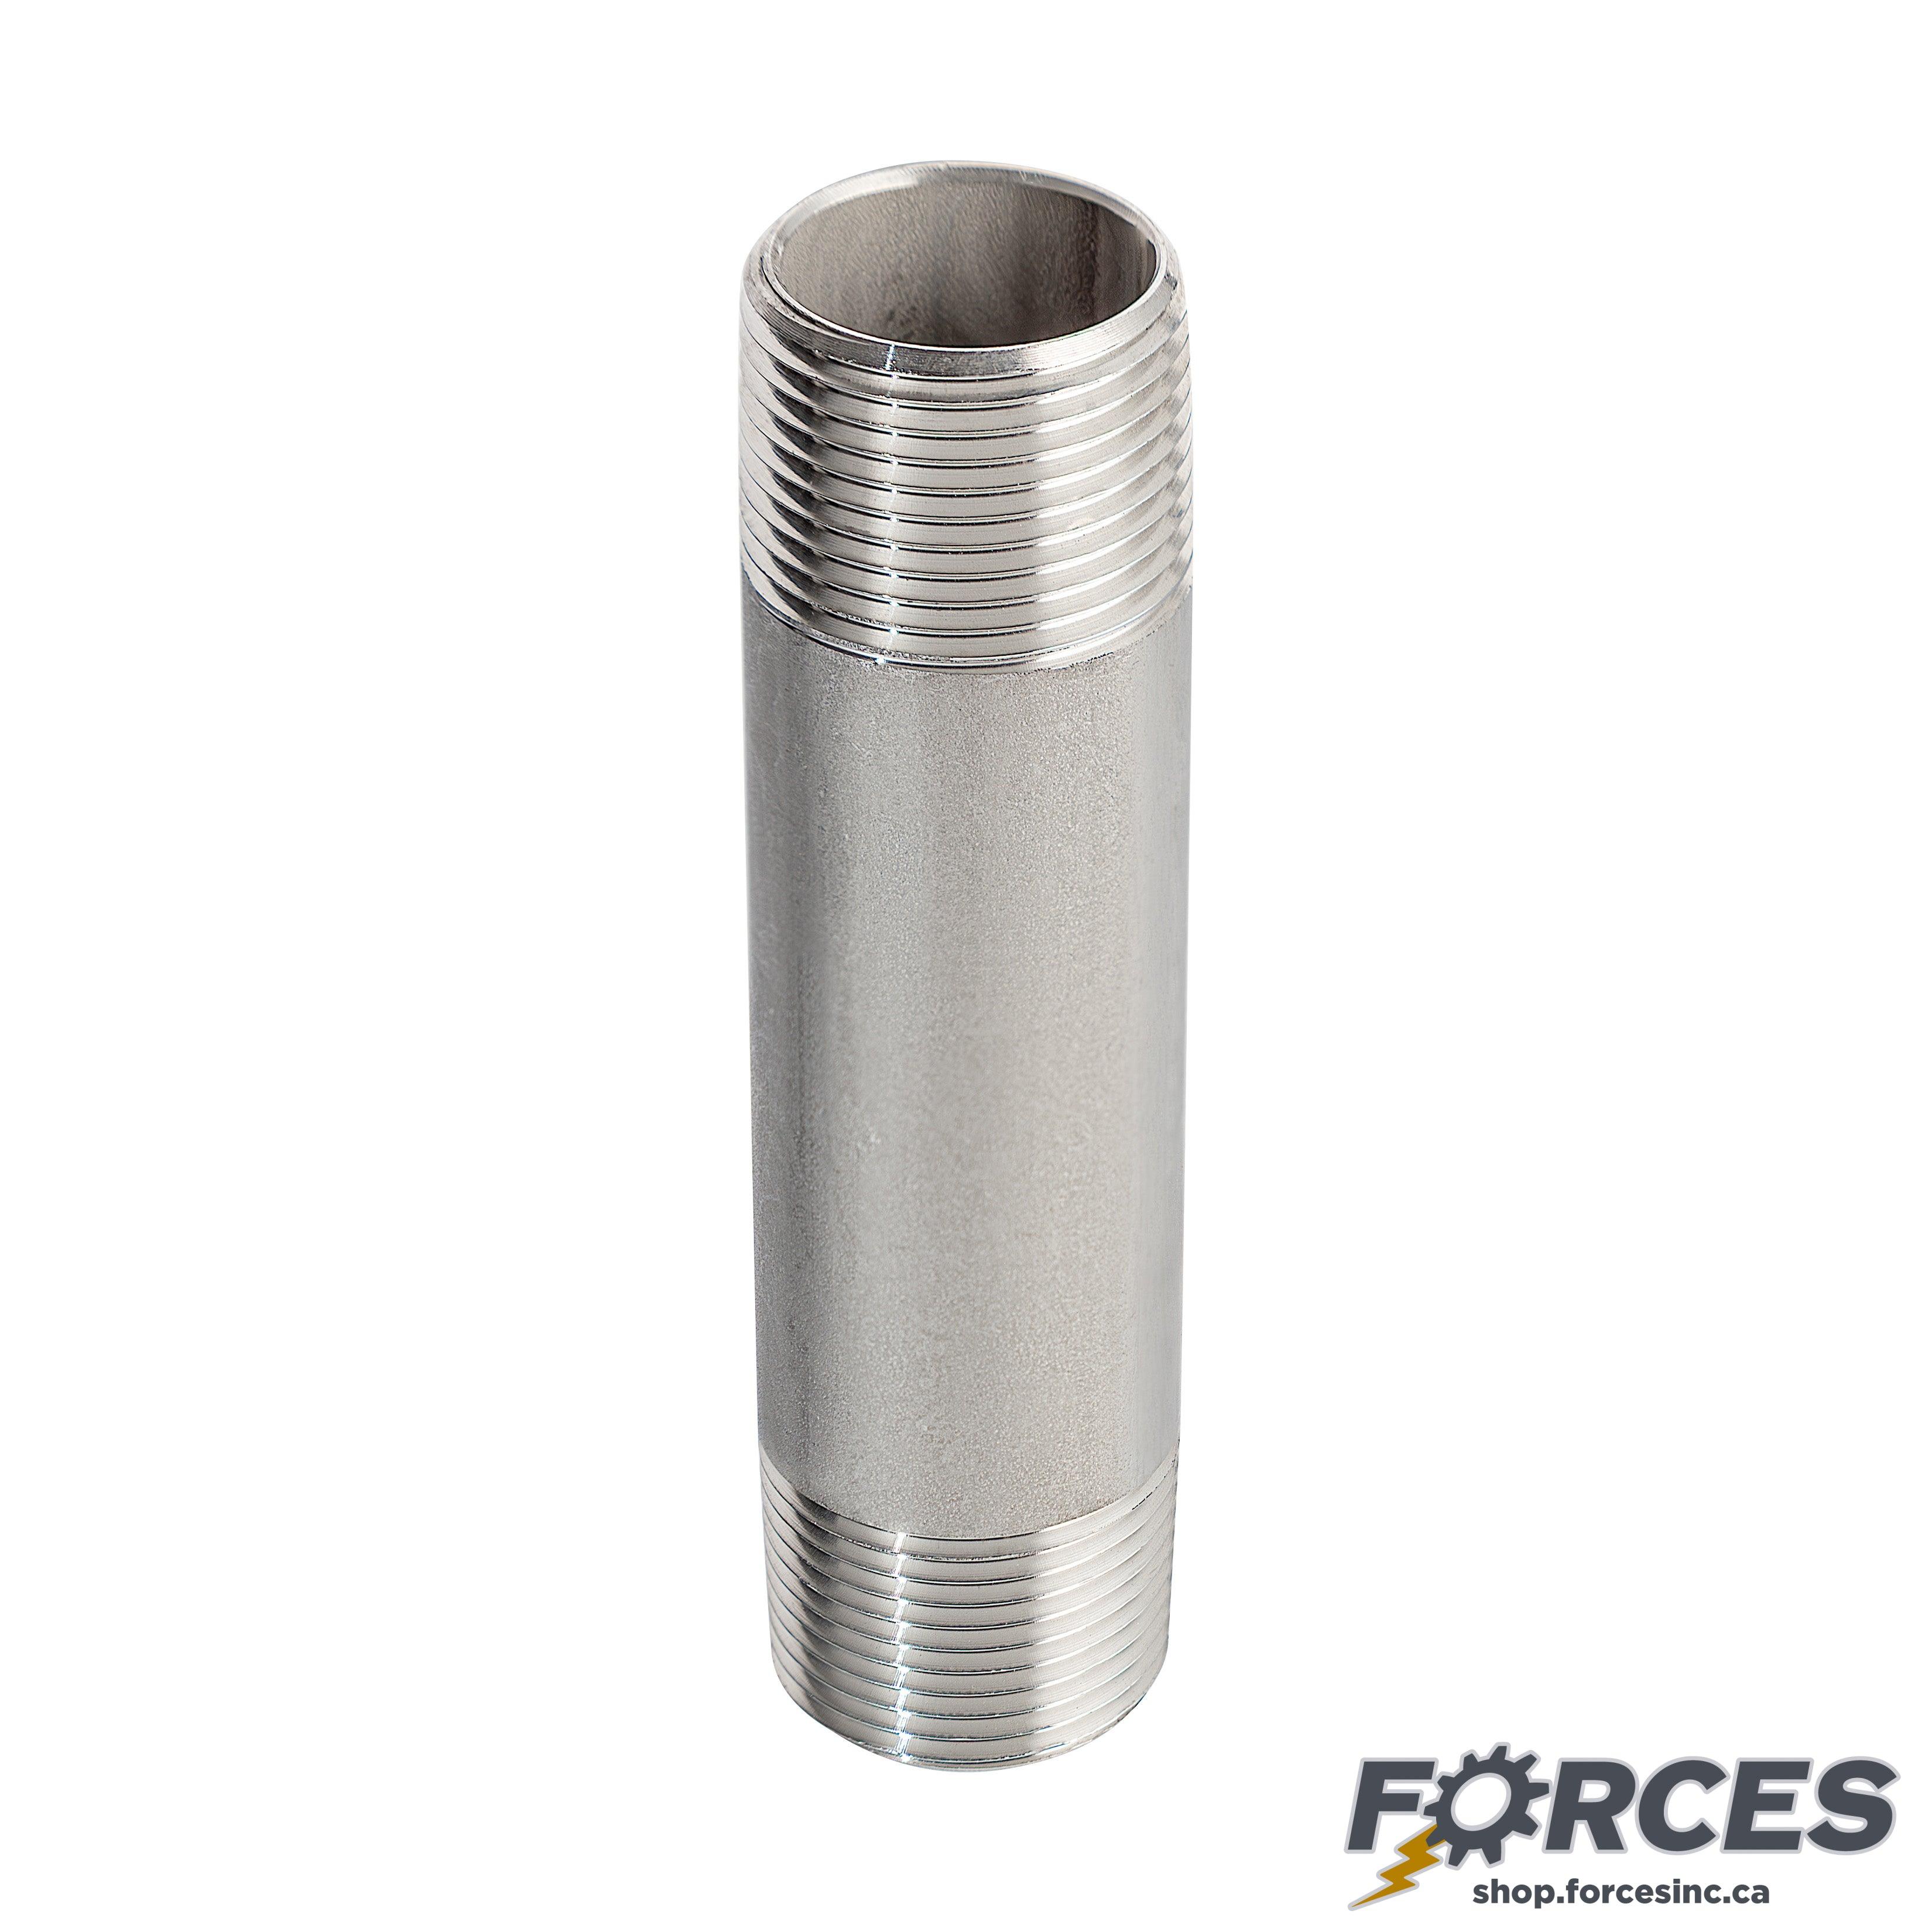 4" X 12" Long Nipple - Stainless Steel 316 - Forces Inc